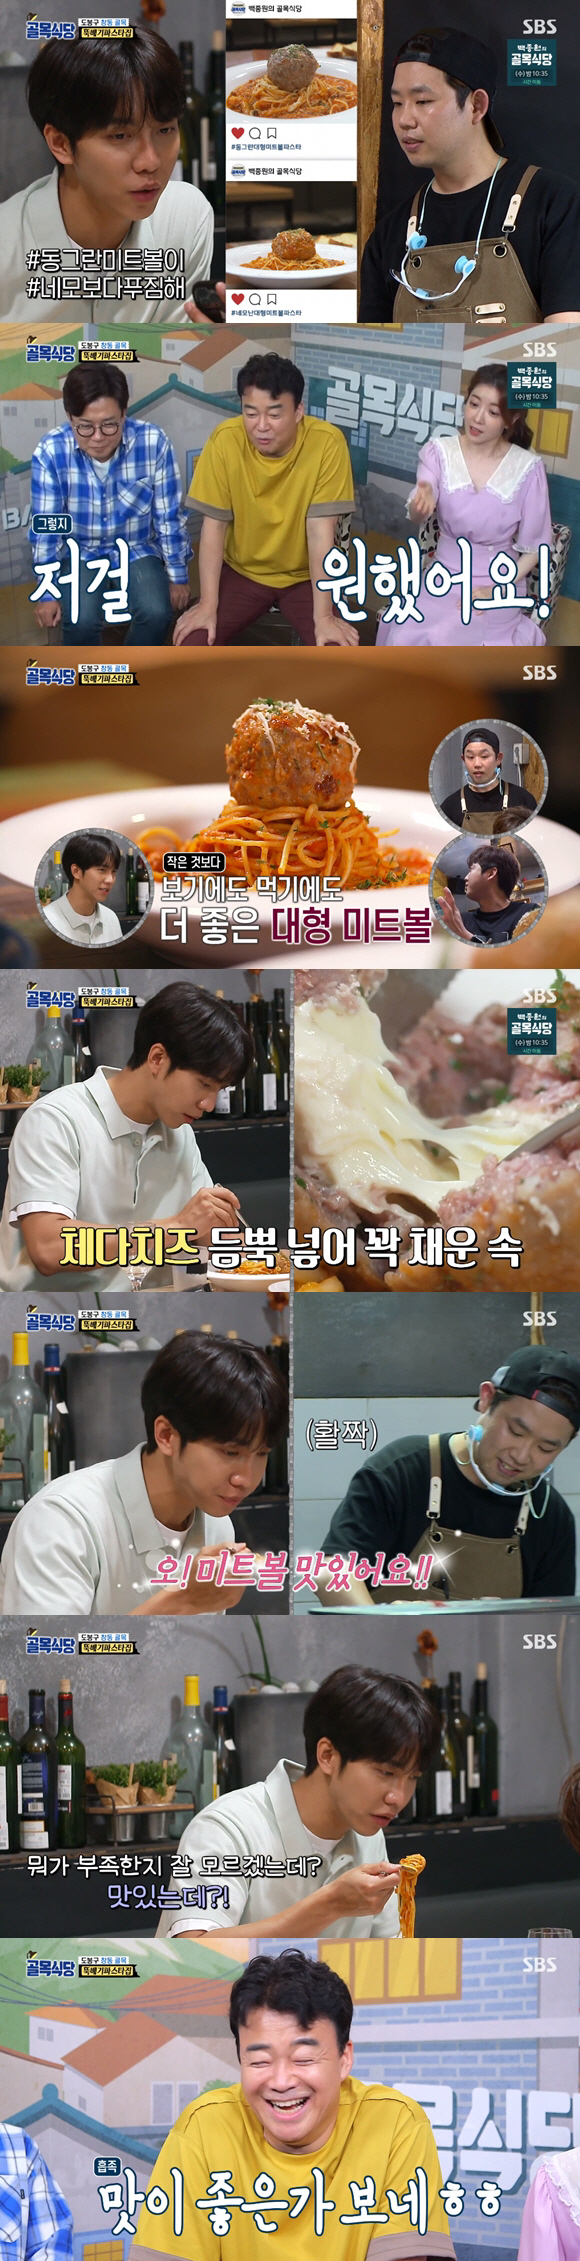 All-time Top-trend Lee Seung-gi is on Alley RestaurantOn the 19th, SBS Baek Jong-wons Alley Restaurant was released on the 25th alley Dobong District Chang-dong Alley.On this day, Lee Seung-gi, a big entertainer, appeared as a pre-tour group and was surprised.Lee Seung-gi, who is known from Dobong District, said: I spent my childhood in Dobong District; after my debut I lived in Chang-dong for about a year.I visited because of shooting today, and I have a lot of old thoughts. Lee Seung-gi also reveals his fanfare for Baek Jong-won, saying, I usually admire Mr. Baek Jong-won.I had a chance to go to Mr. Baek Jong-wons house, he said.Lee Seung-gi said, I admired Mr. Baek Jong-won so much and asked him to ask him to be invited to my house once. But he said, My brother made a punk two days ago.At first I thought it was a teachers situation, and at the end of Lee Seung-gi, Baek Jong-won said, I thought it was Lee Seung-gi. I laughed when I realized that all the reasons were Yang Se-hyeong.On this day, the president of Ttukbaegi Pasta House entered the study of meatball Pasta.I have a taste, but my bosss meatball Pasta lacks personality, said Baek Jong-won. If you make this, do you think customers will come?If you upload a late picture to SNS, you will be able to catch peoples attention. Study the shape of meatballs more. Lee Seung-gi visited the Ttukbaegi Pasta House after receiving a special mission from Baek Jong-won.Baek Jong-won asked Lee Seung-gi for a cool assessment of the new visual meatball Pasta, which the boss reshaped.Lee Seung-gi, who saw the upgraded meatball Pasta, took the picture first; Lee Seung-gi, who ate meatballs with cheddar cheese, said: Its delicious.I think the big meatballs are okay. They look great. Pasta sauce is also praised and said, Its a sauce I want to eat rice. Lee Seung-gi, who was playing Storm Mukbang, said frankly: Its delicious enough to know whats missing - what should I say the problem, its just delicious.Lee Seung-gi, who also sampled Arancini Cream Pasta, praised it as a really favorite CreamPasta flavor, its perfect.He also advised Arancini that I feel like I have less rice than cheese.From the first shooting, the manga duo Chicken Gangjeongjip, which was attracted to the heart of Baek Jong-won as well as the guest.Jung In-sun was put in for a more cool evaluation on the day, and the boss decided to check the homework that he studied for a week.However, the two bosses intimate talks shook their cool hearts and laughed.Earlier, Baek Jong-won advised the sauce, It is the sauce that determines the taste of chicken Gangjeong, so try a lot of tests.The two bosses said, We have used whole garlic directly in the existing frozen garlic, and we have also replaced it with general soy sauce in plum soy sauce.We are also using rice paddies, he explained.However, MC Kim Seong-joo, who ate the changed garlic soy sauce chicken Gangjeong, said, It tastes like pickles.Rather, when you eat only fried, you have a crisper and richer taste. Baek Jong-won also said, I think its too much syrup.If the seasoning chicken is a thick seasoning, the chicken must have a crispy texture, he said.Baek Jong-won pointed out the sticky texture problem without crispy even though the bosss chicken gangjeong was Gangjeong, and put 2MC into the store to find a solution.Kim Seong-joo explained, It came from the Seodang Association. He started the difference between chicken gangjeong and source chicken and helped the bosses study their texture through simple experiments.I made sauce with starch syrup and sugar, and I put fried it and tasted it directly.The starch syrup has a little sweetness, but it has changed the crispness of the fried food to dampness.Last week, with the help of Valeria Fabrizi Riccio chef, the Italian Tuna Pizza, which was praised by all 3MCs, was born.Once again, Valeria Fabrizi Riccio chef visited and created a new menu Cotalia pizza with authentic Italian pizza and Korean pepper oil.Its delicious; its delicious with ricotta cheese, praised Baek Jong-won, who sampled NEW pizza with a buoyant expectation.Kim Seong-joo and Jung In-sun also hailed it as flavory.